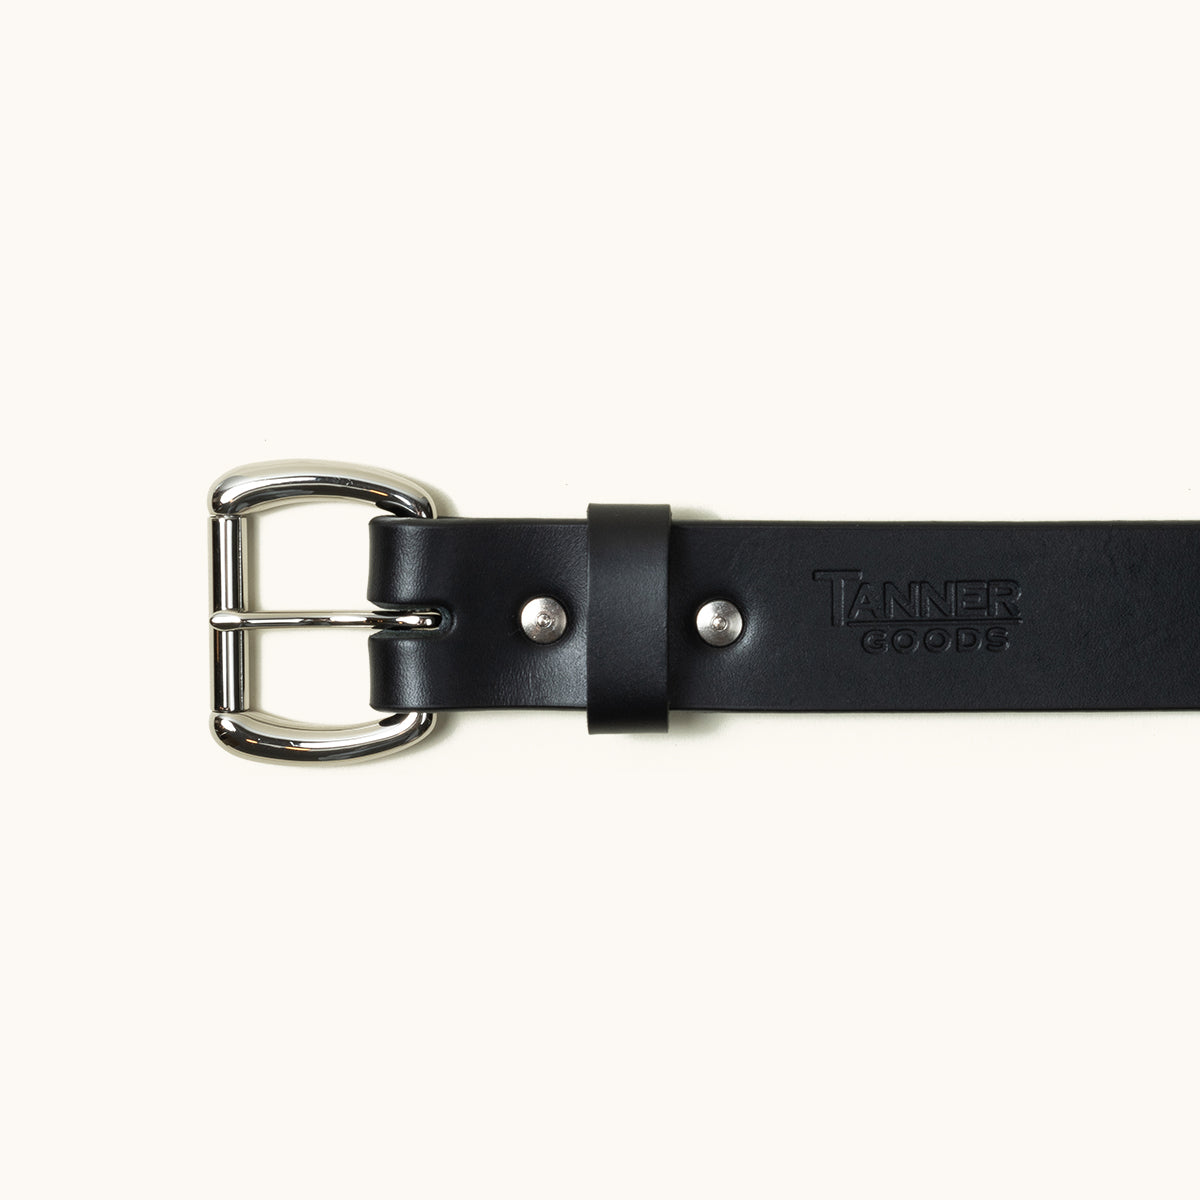 The top half of a black Standard belt showing a stainless roller ball buckle and Tanner Goods logo stamped into the belt.